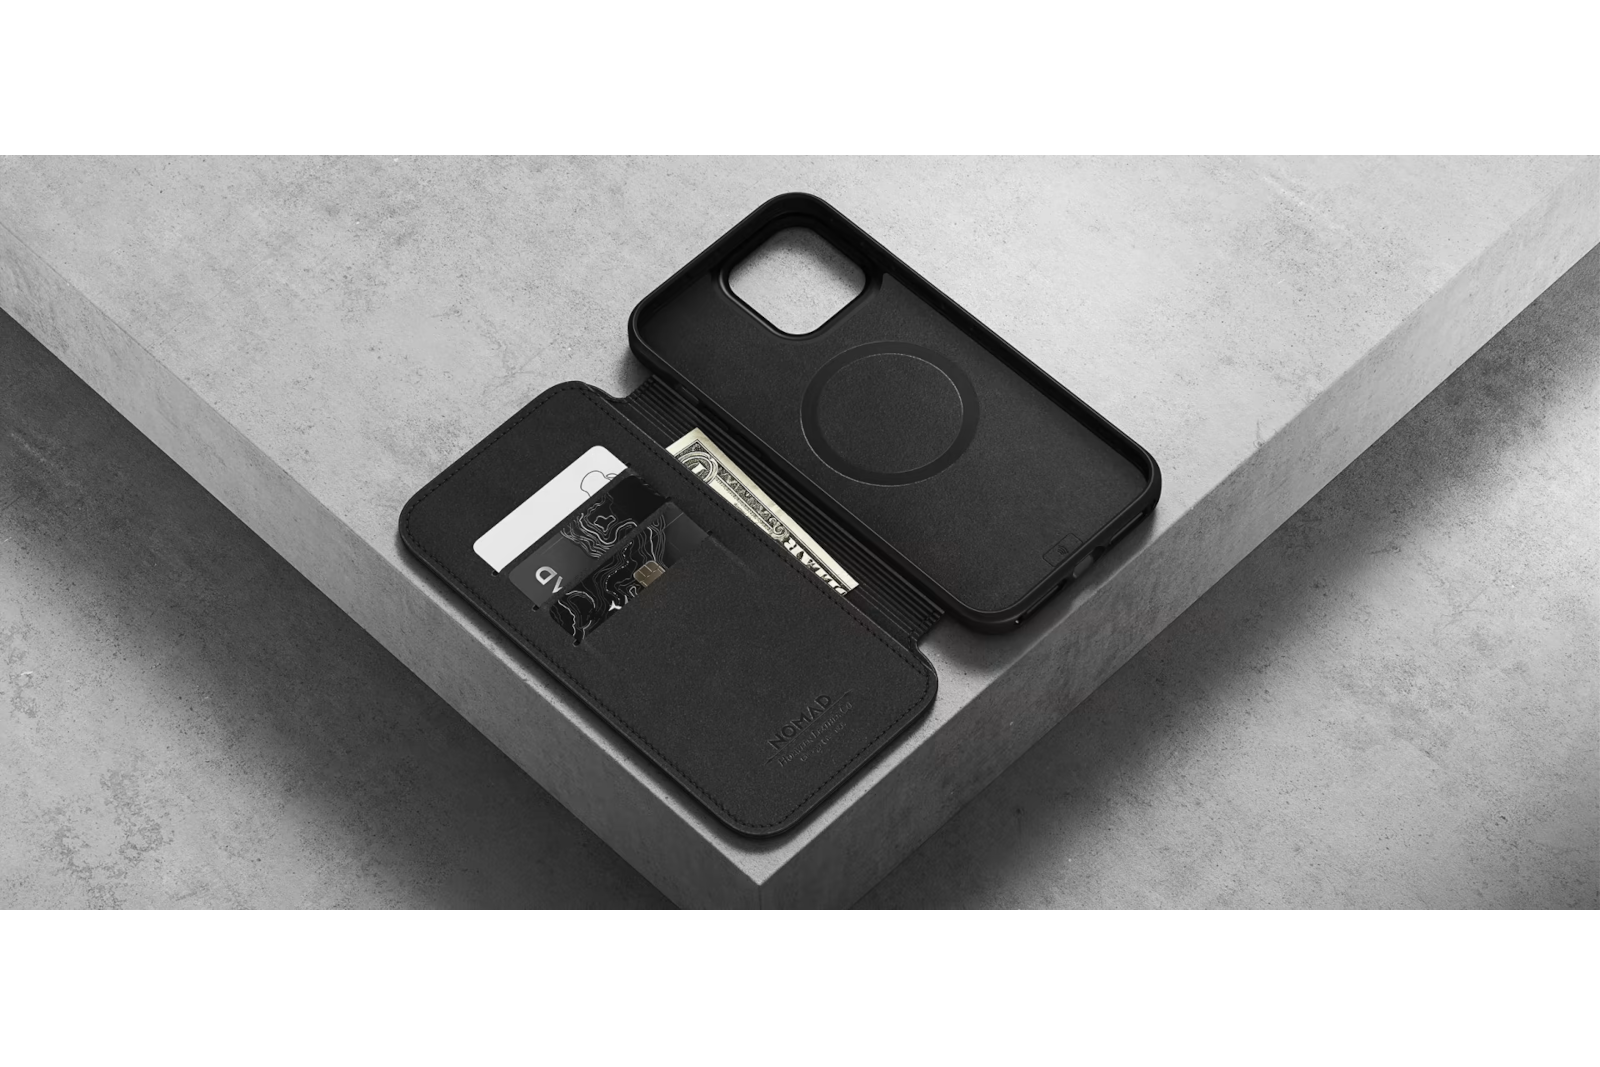 Nomad&#039;s new iPhone 13 cases are fitted with an NFC chip